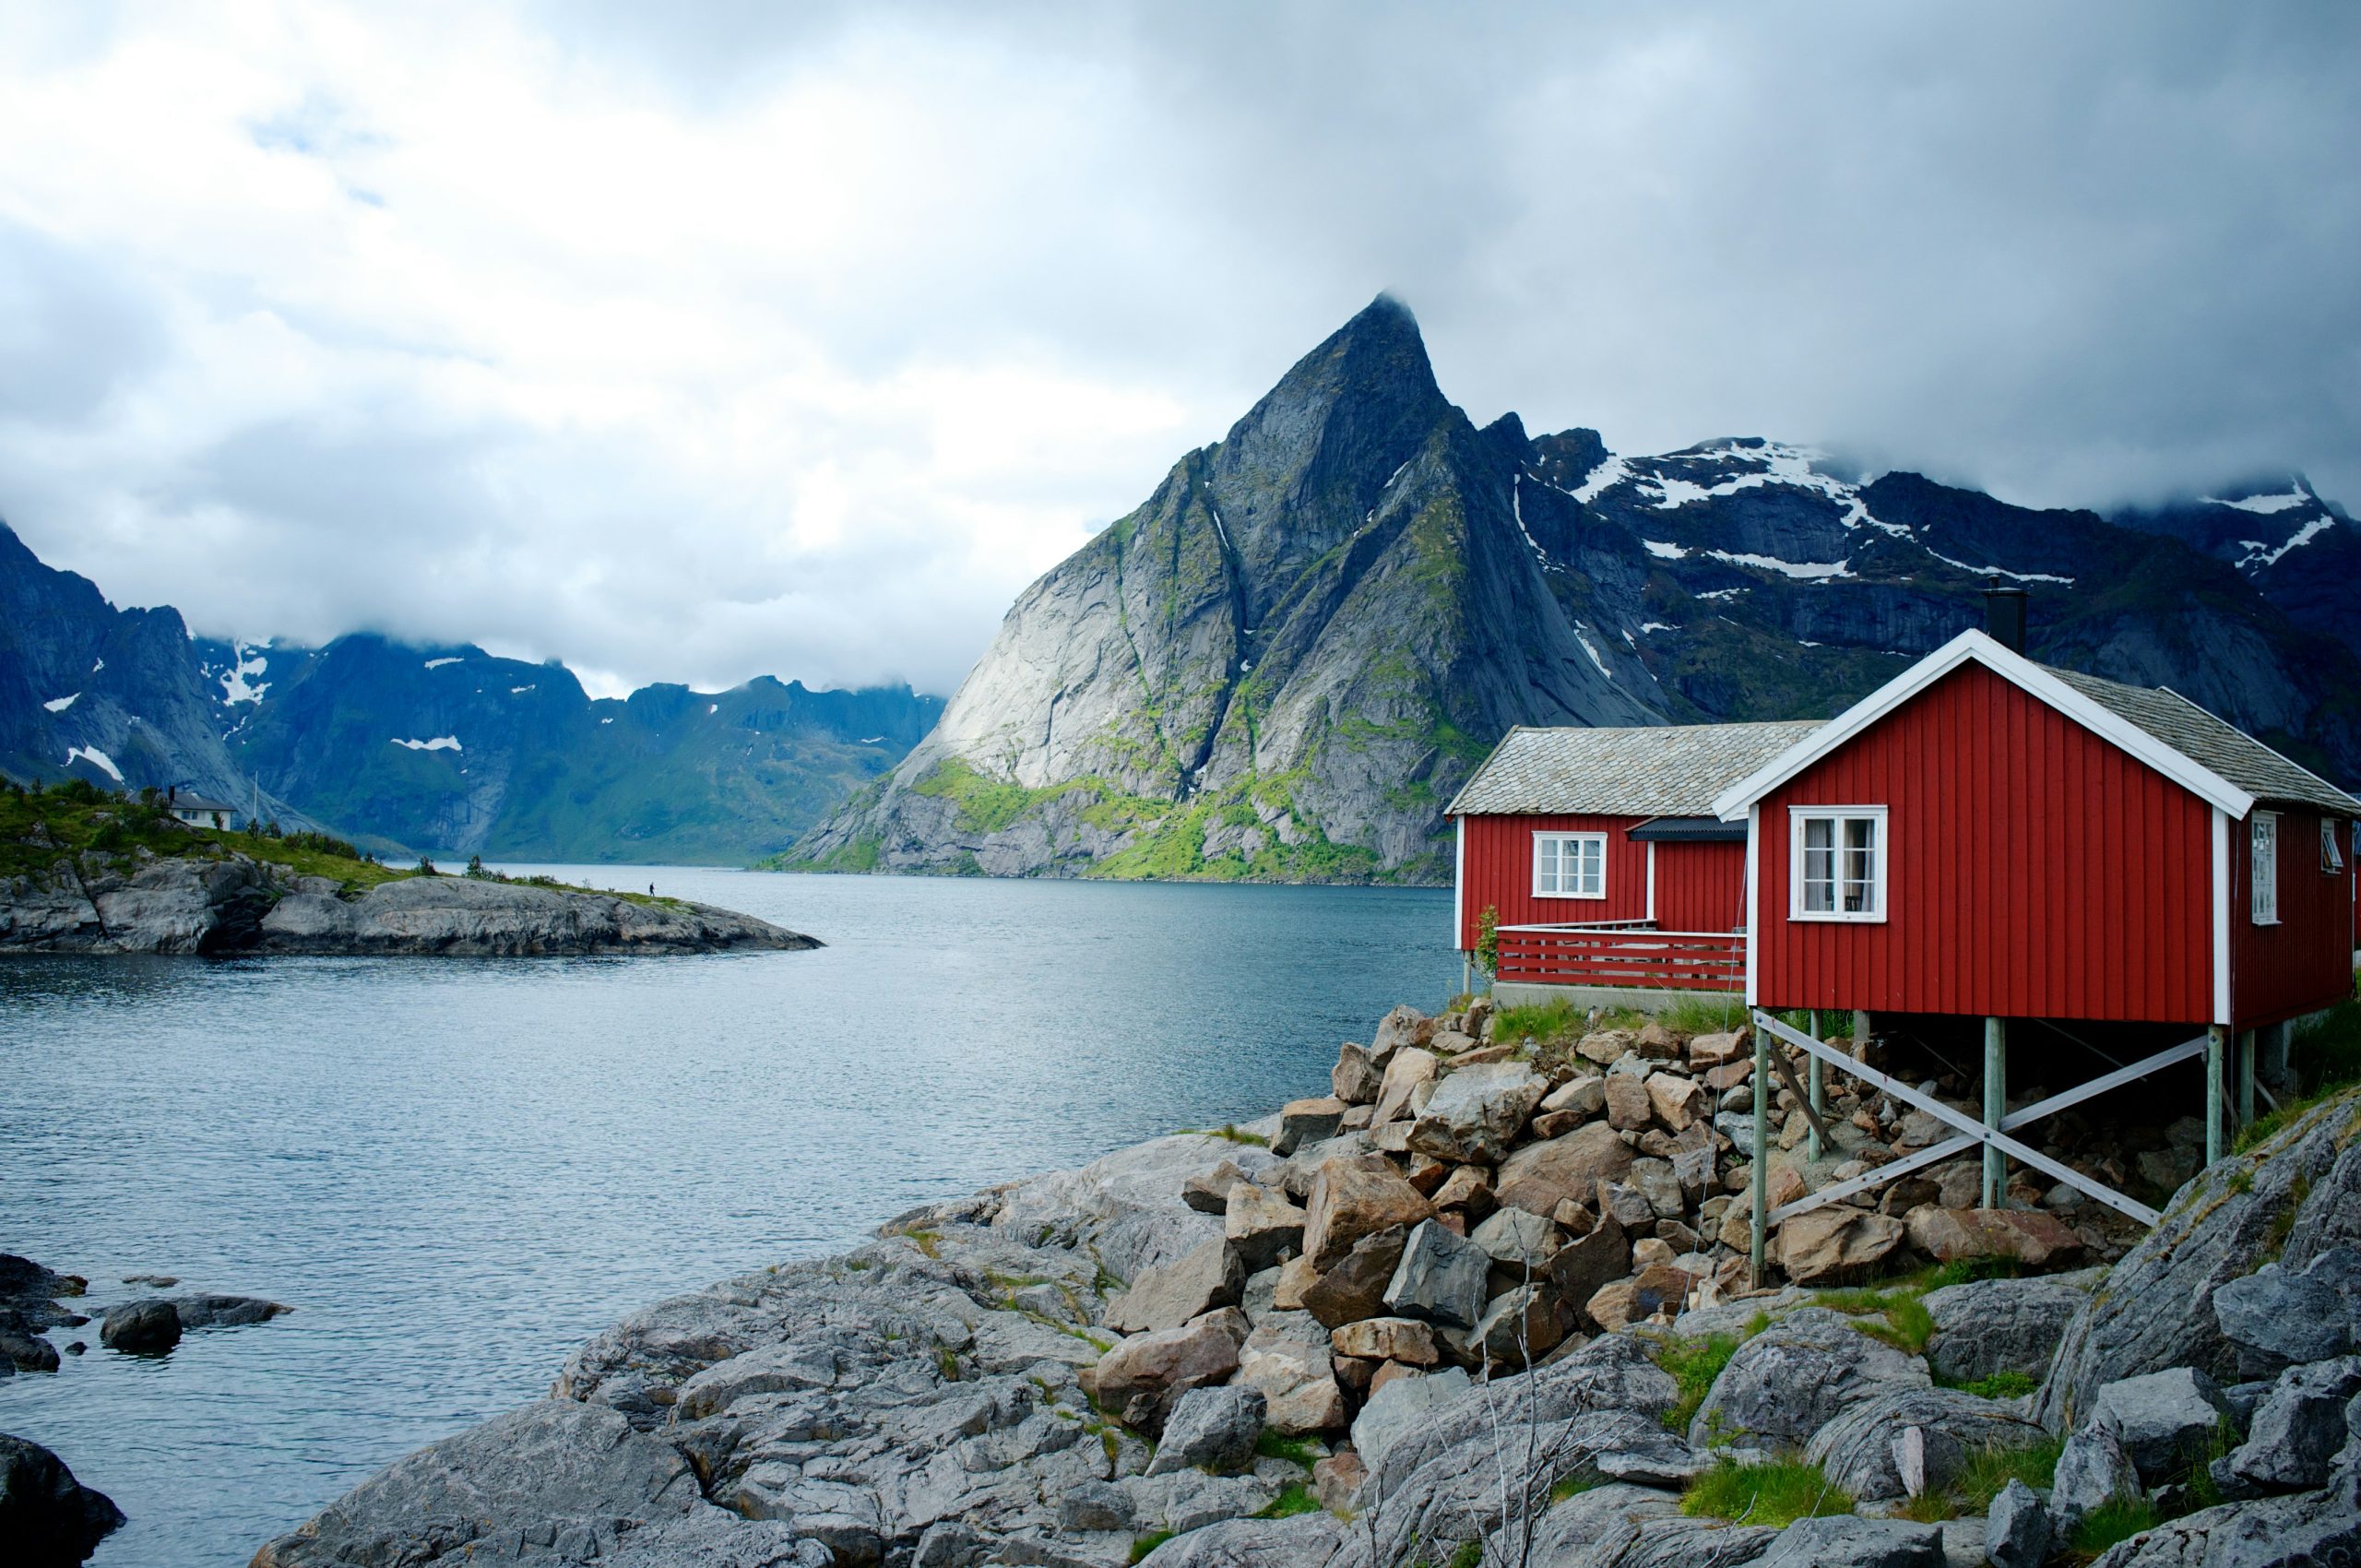 explore the stunning fjords of scandinavia and witness the breathtaking beauty of nature's masterpiece.